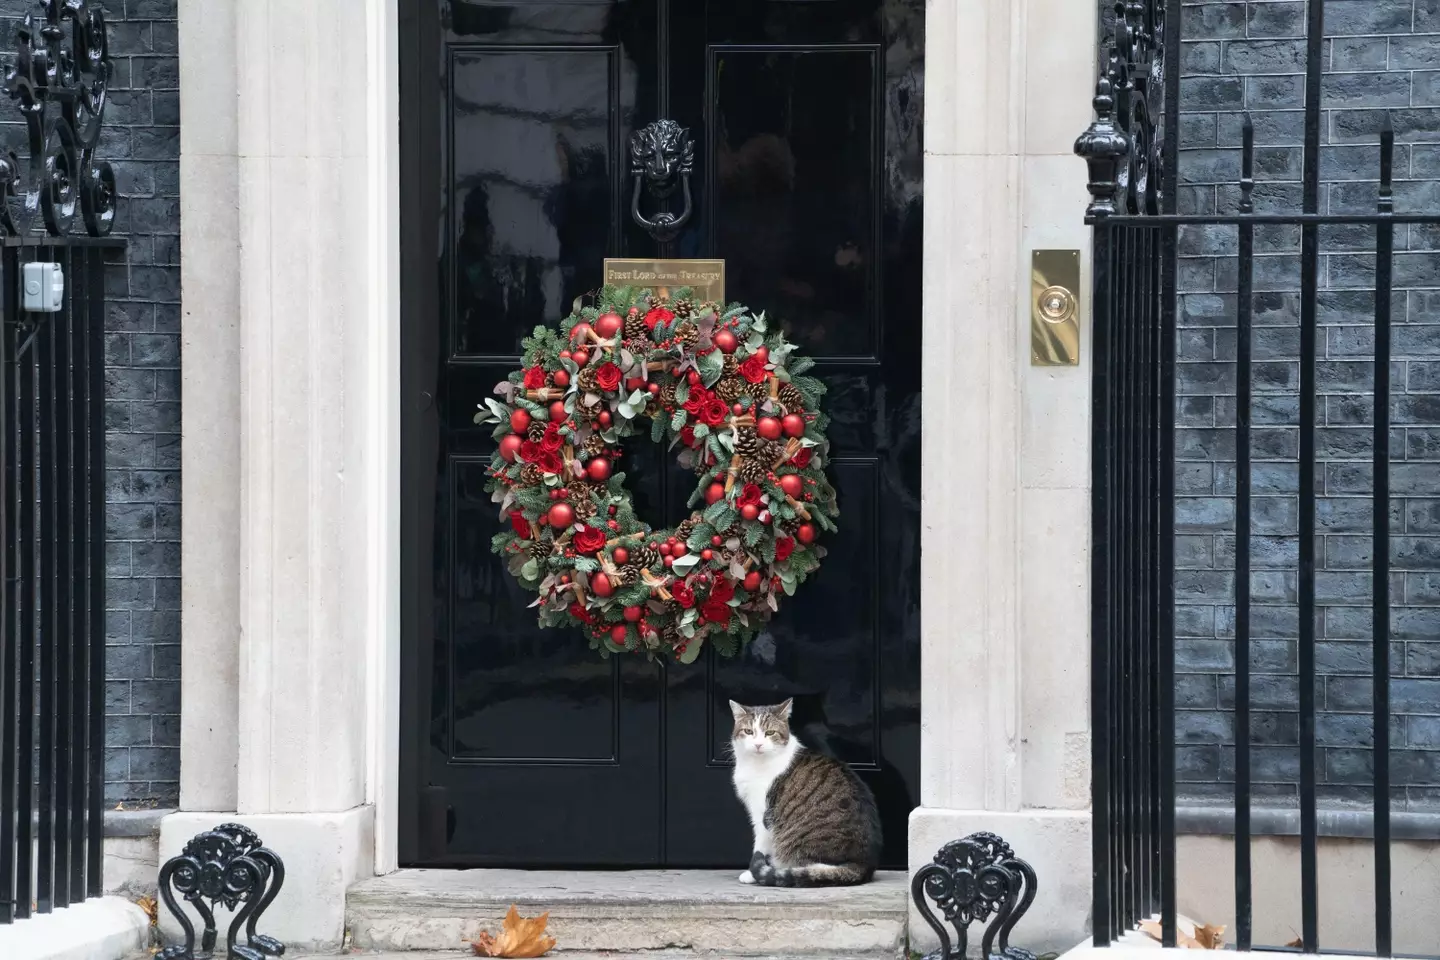 Speculation about an alleged party at Downing Street last year has overshadowed the announcement.